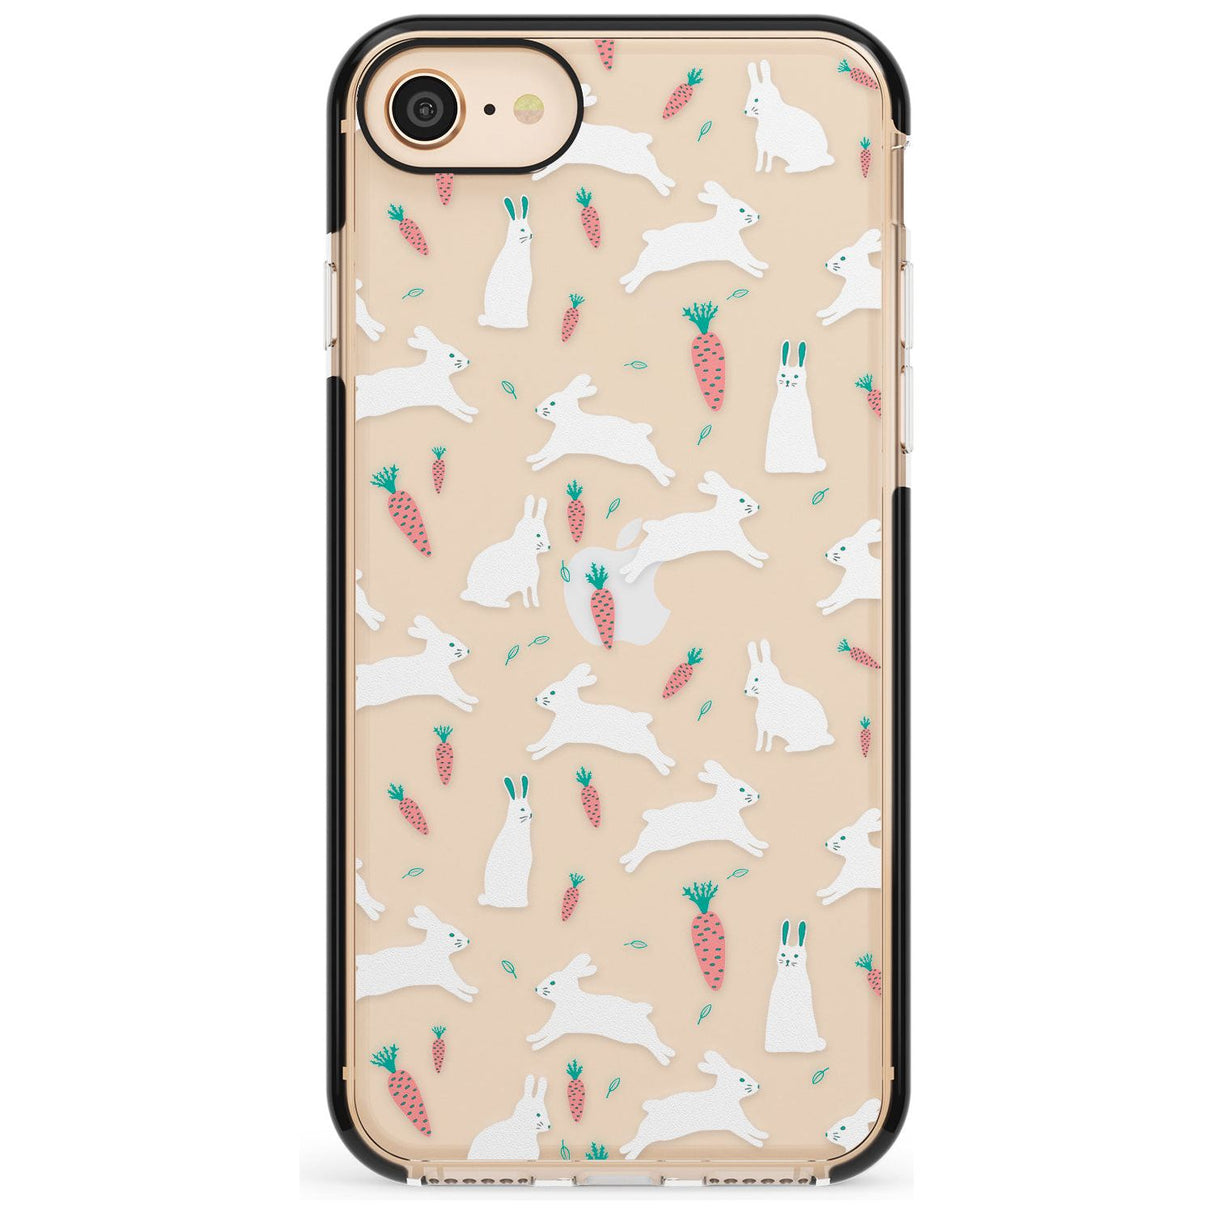 White Bunnies and Carrots Black Impact Phone Case for iPhone SE 8 7 Plus